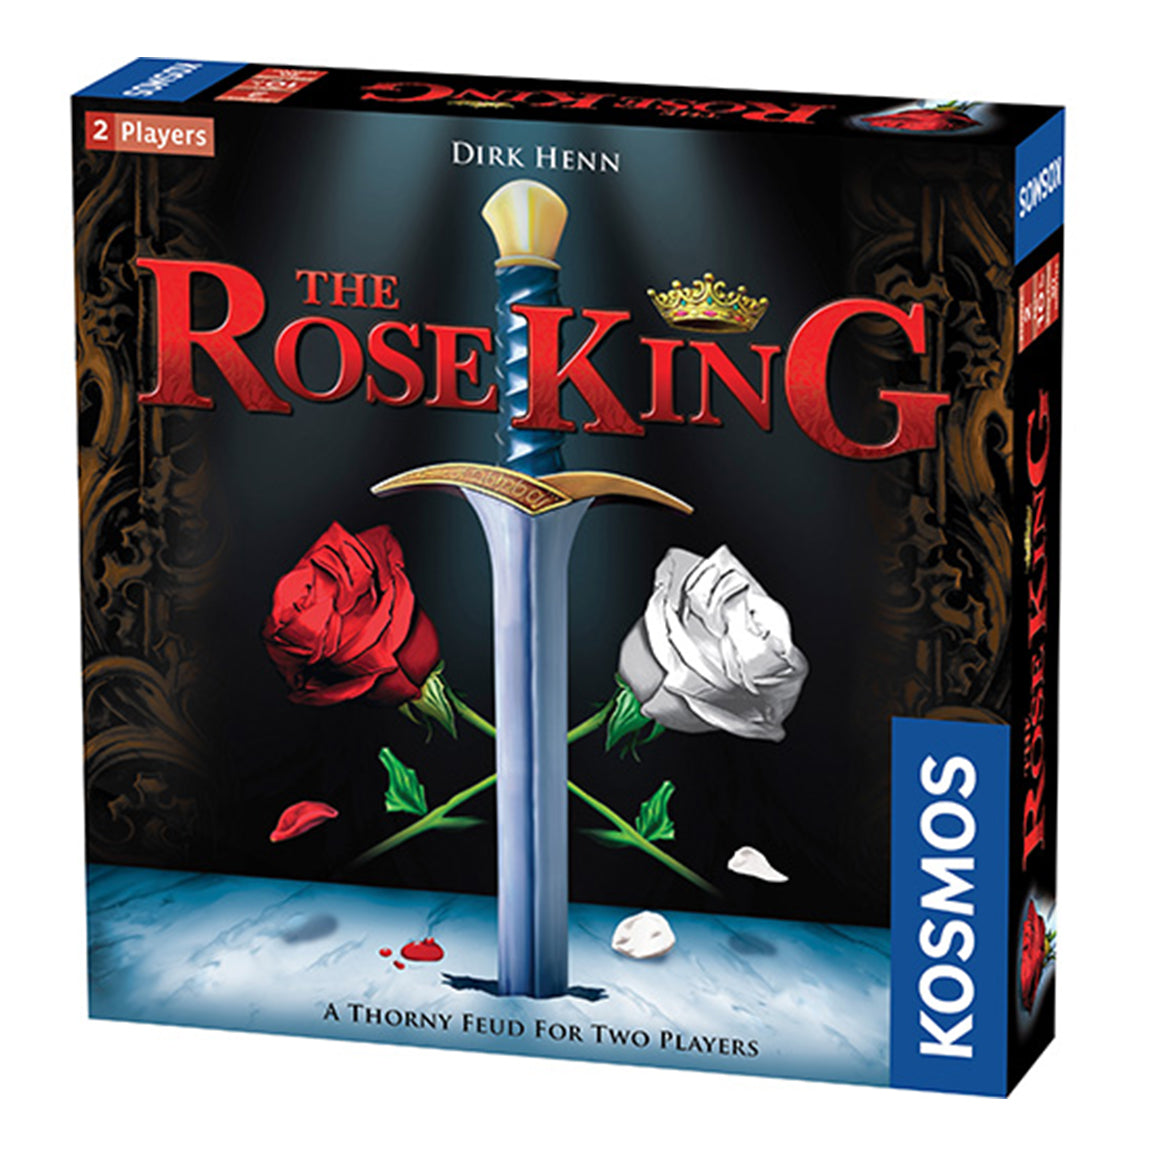 691790The Rose King 10+